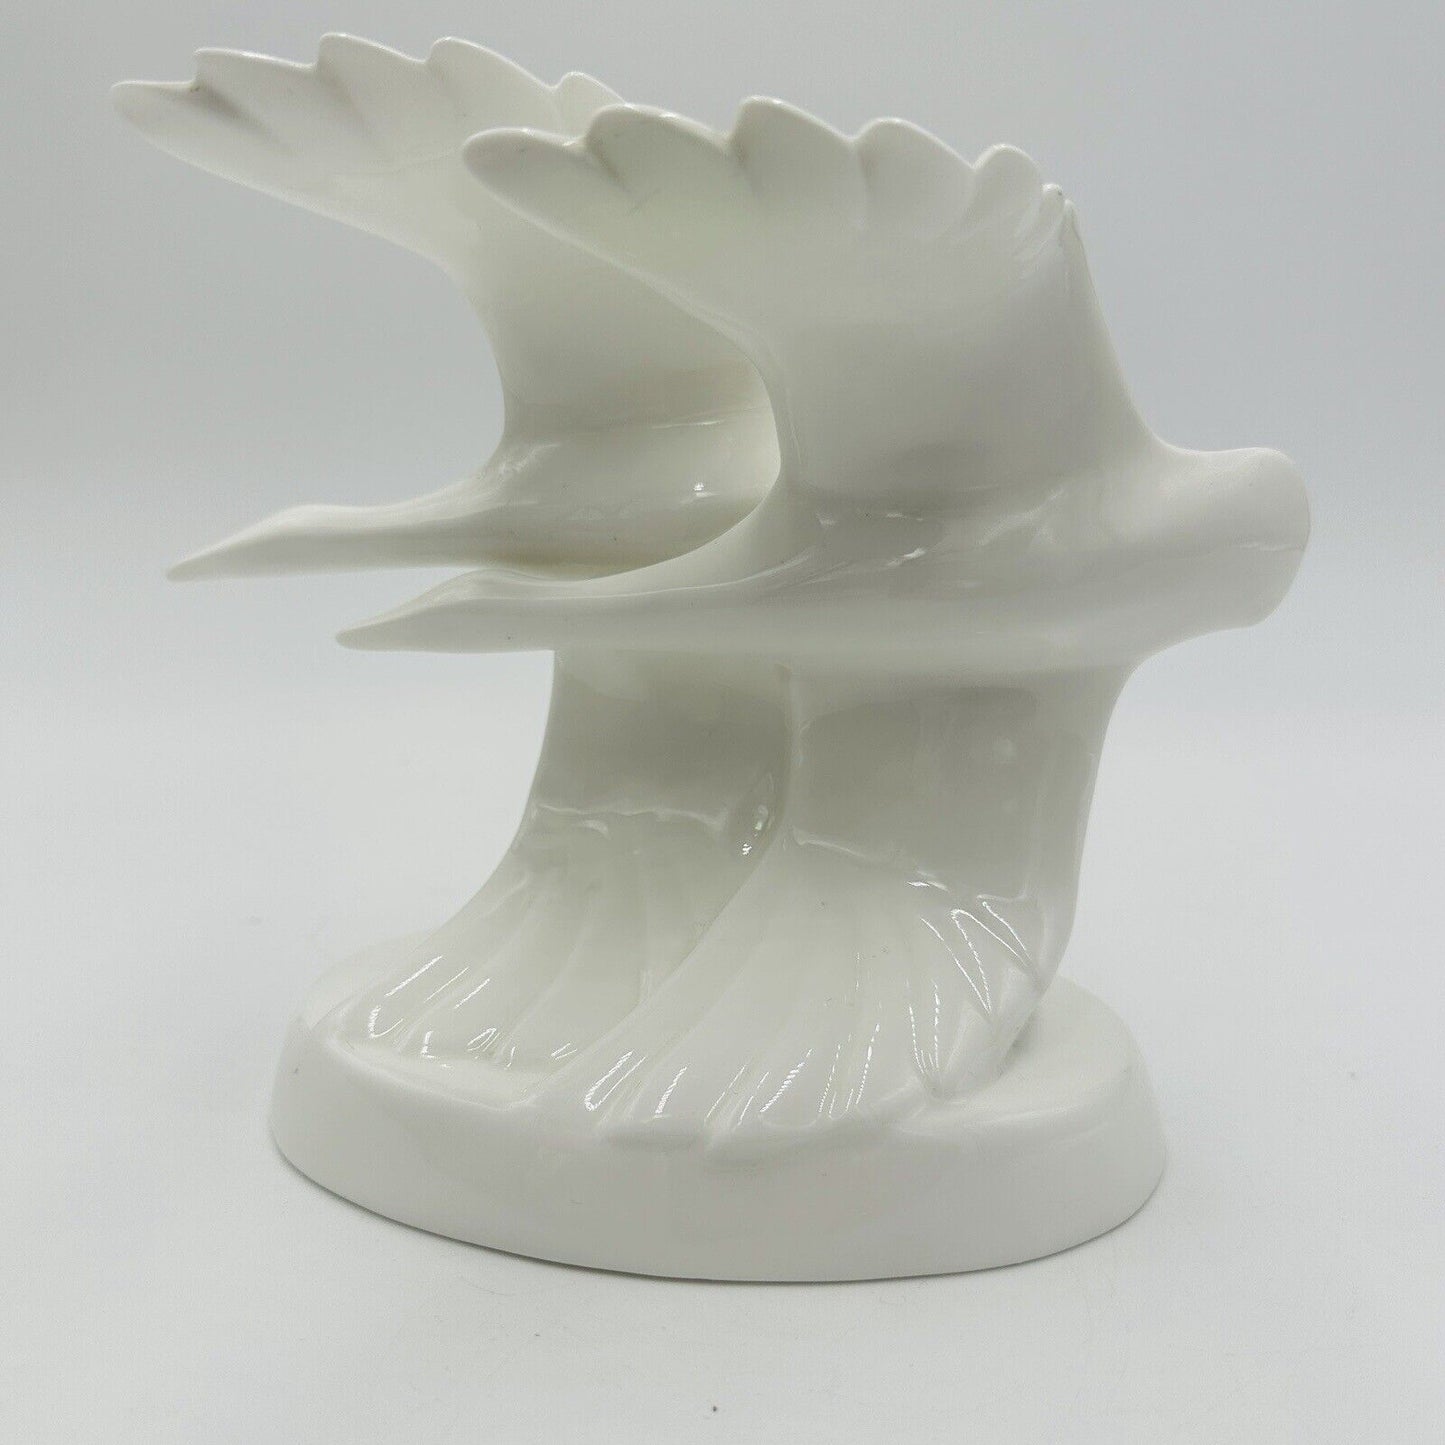 Royal Doulton Figurines "Going Home" Flying Geese 1982 #HN3527 White Glossy